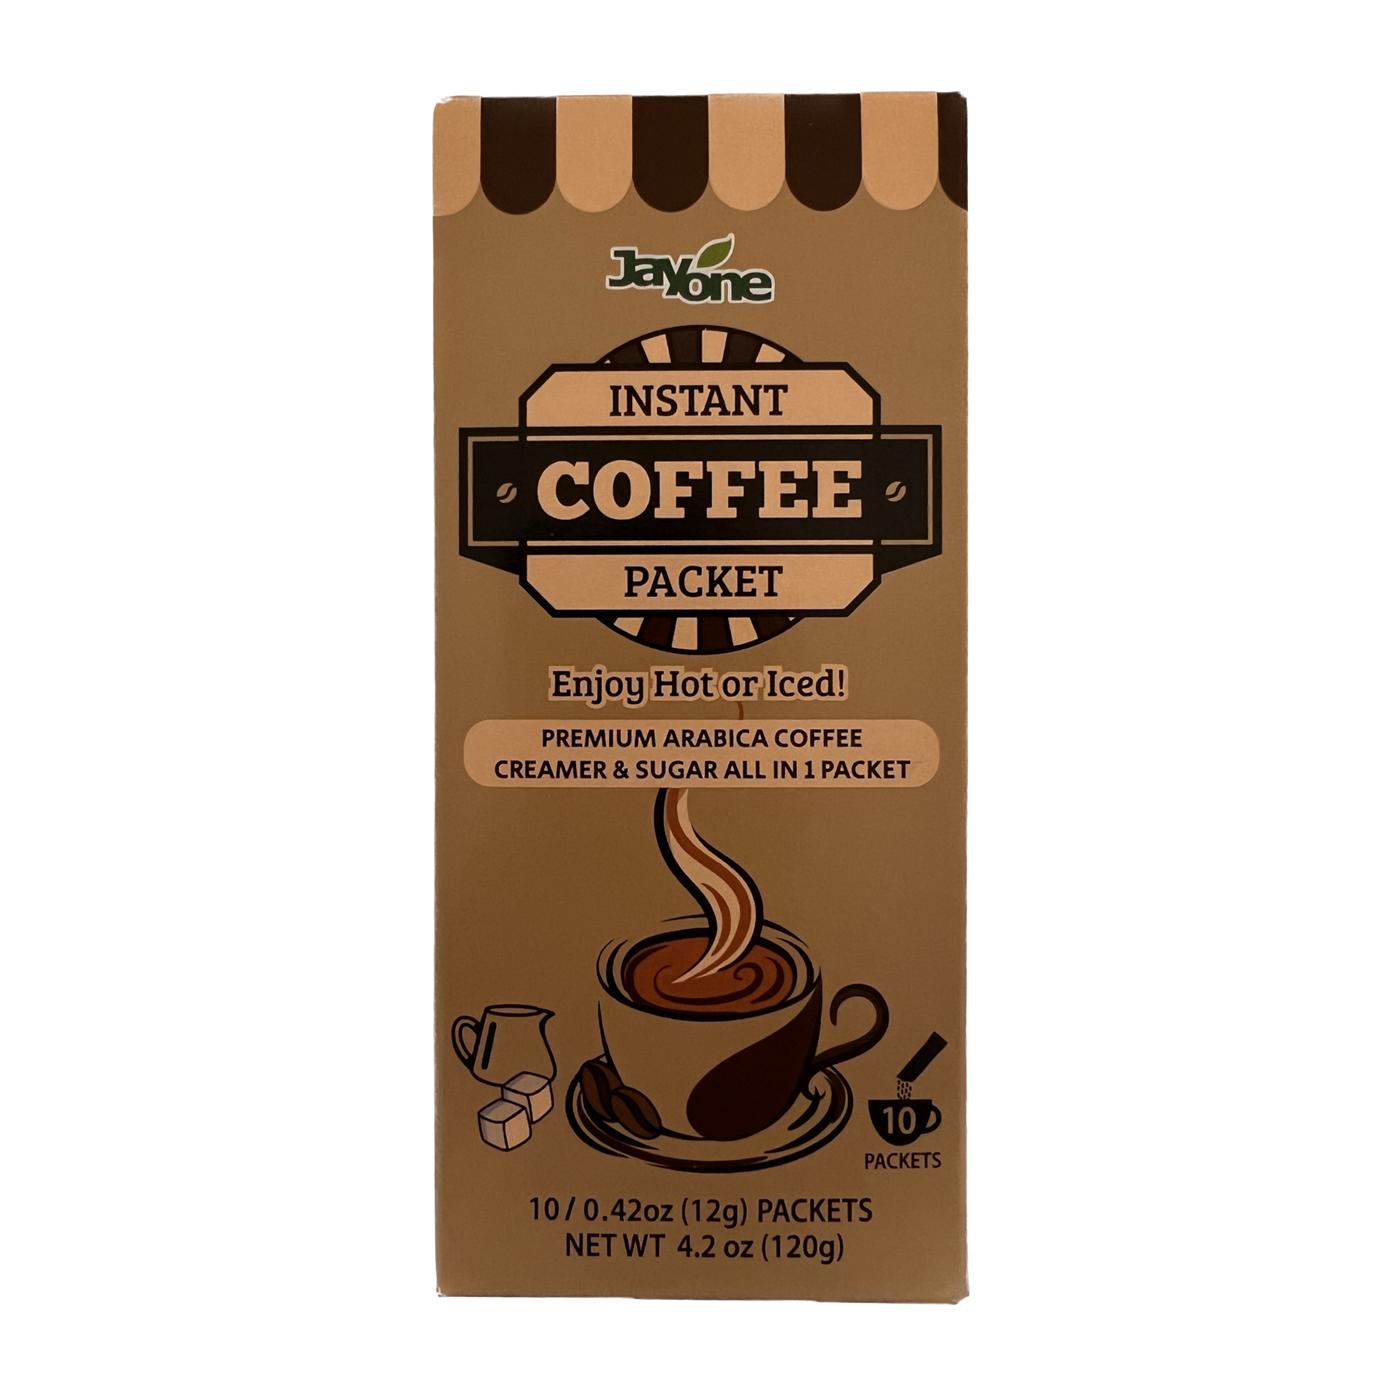 Jayone Instant Coffee Packets; image 1 of 4